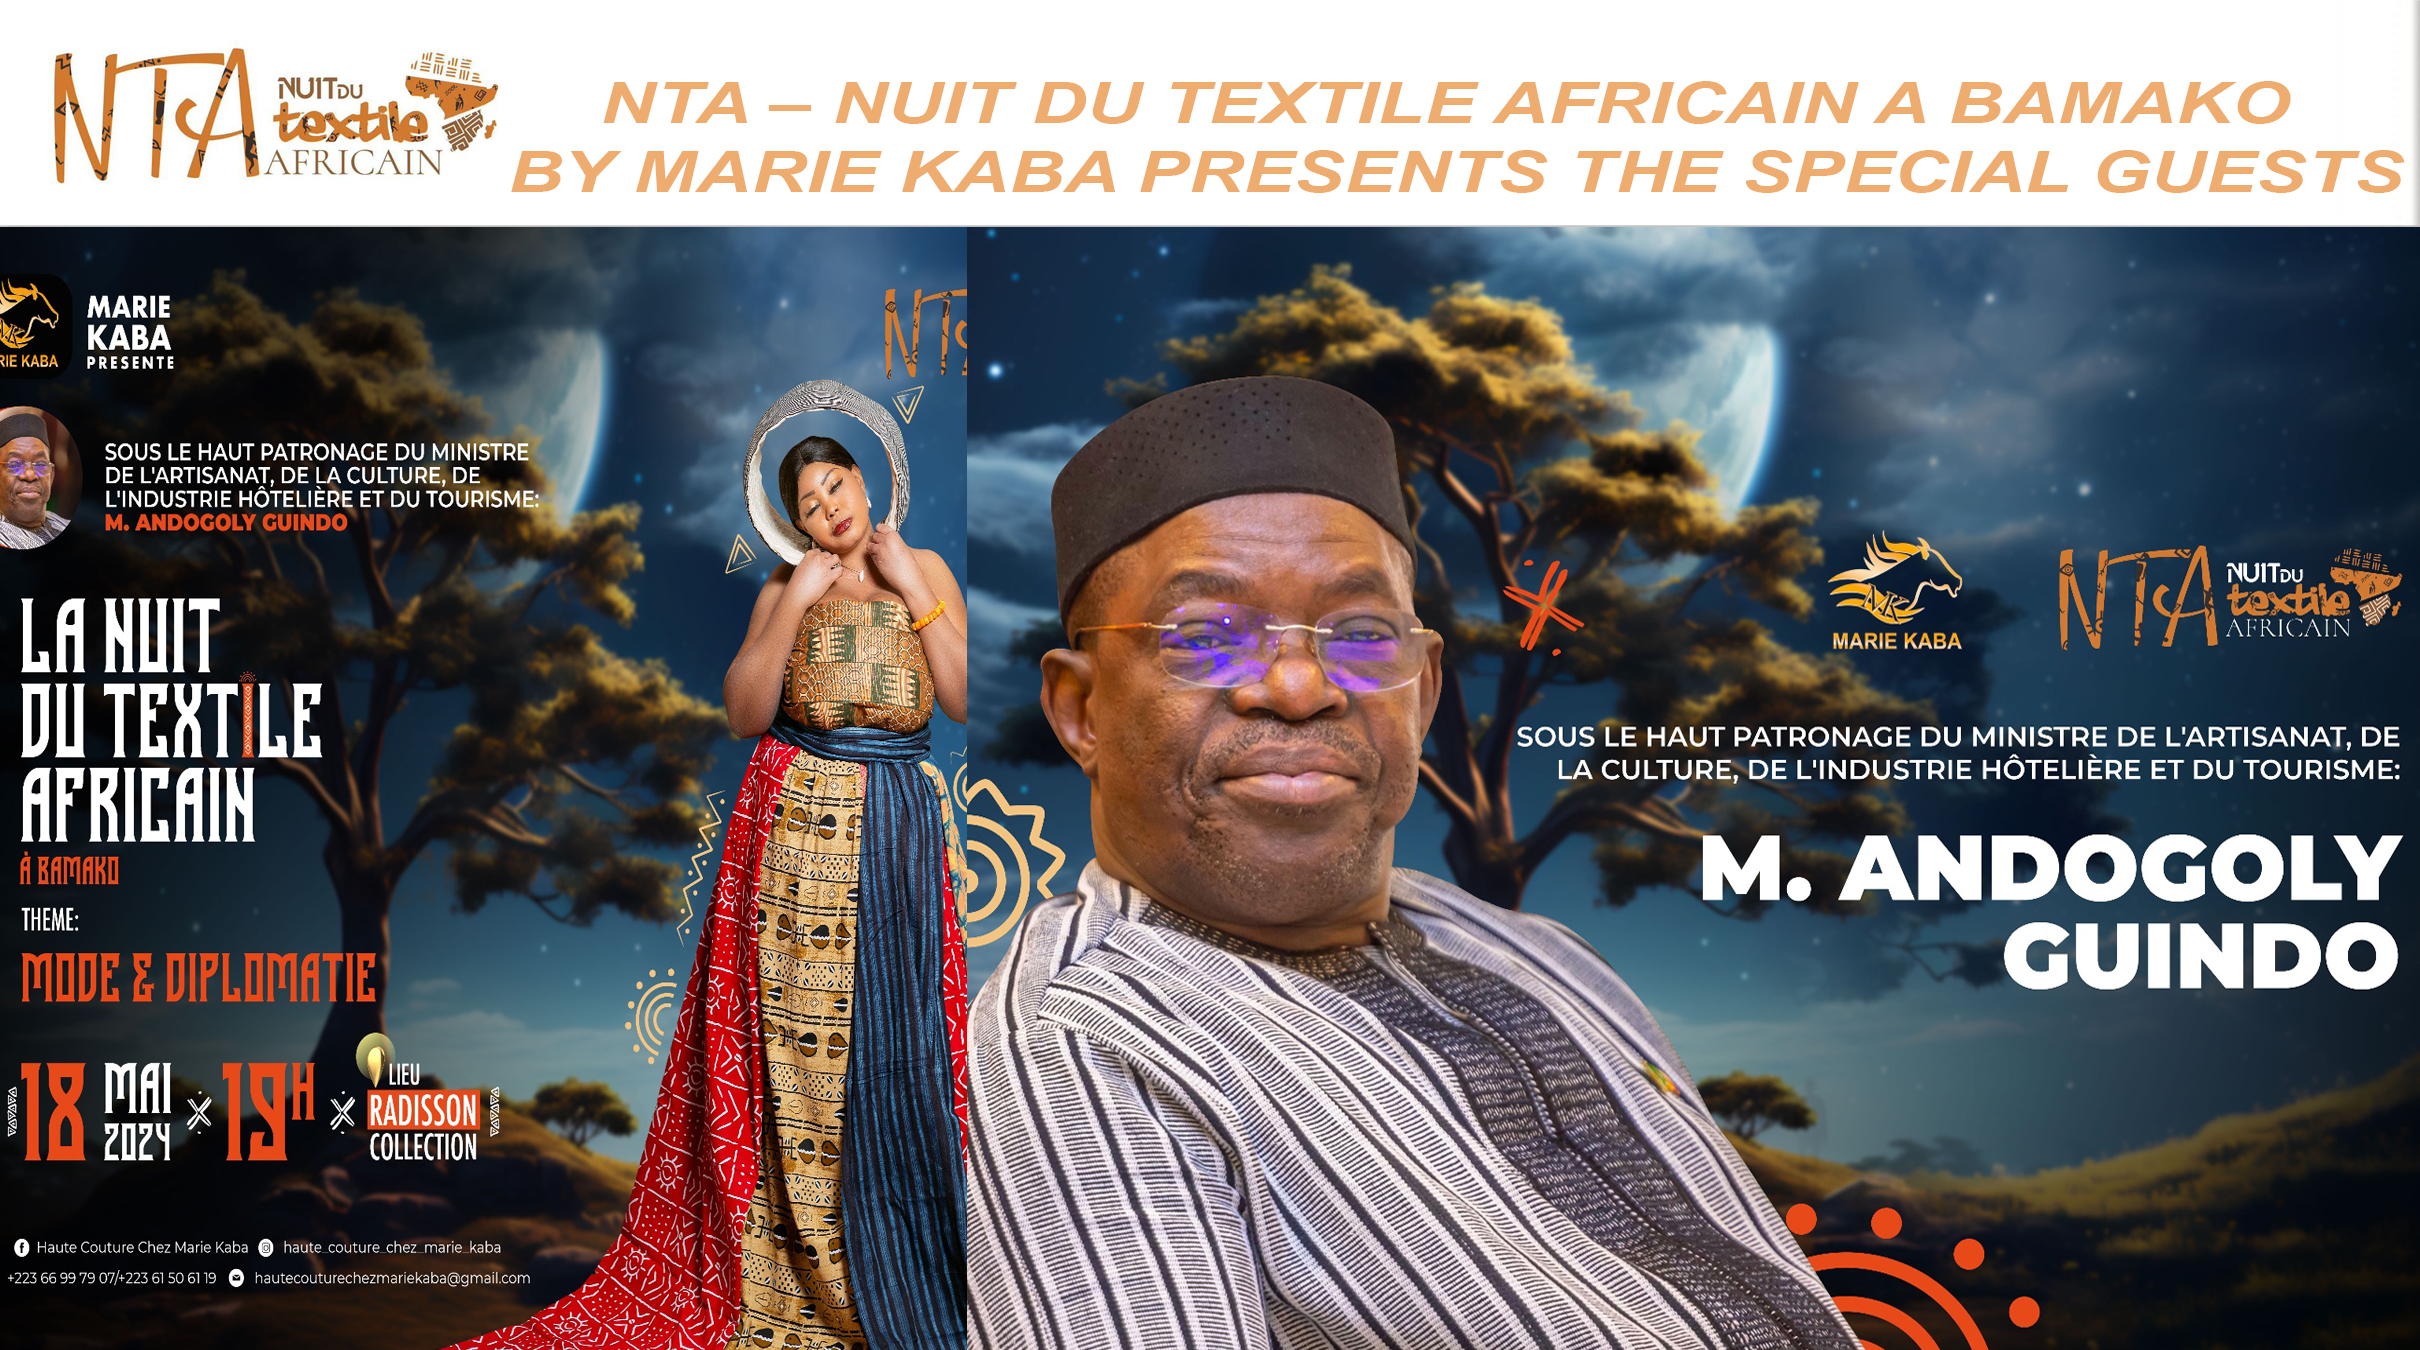 NTA – NUIT DU TEXTILE AFRICAIN A BAMAKO BY MARIE KABA PRESENTS THE SPECIAL GUEST